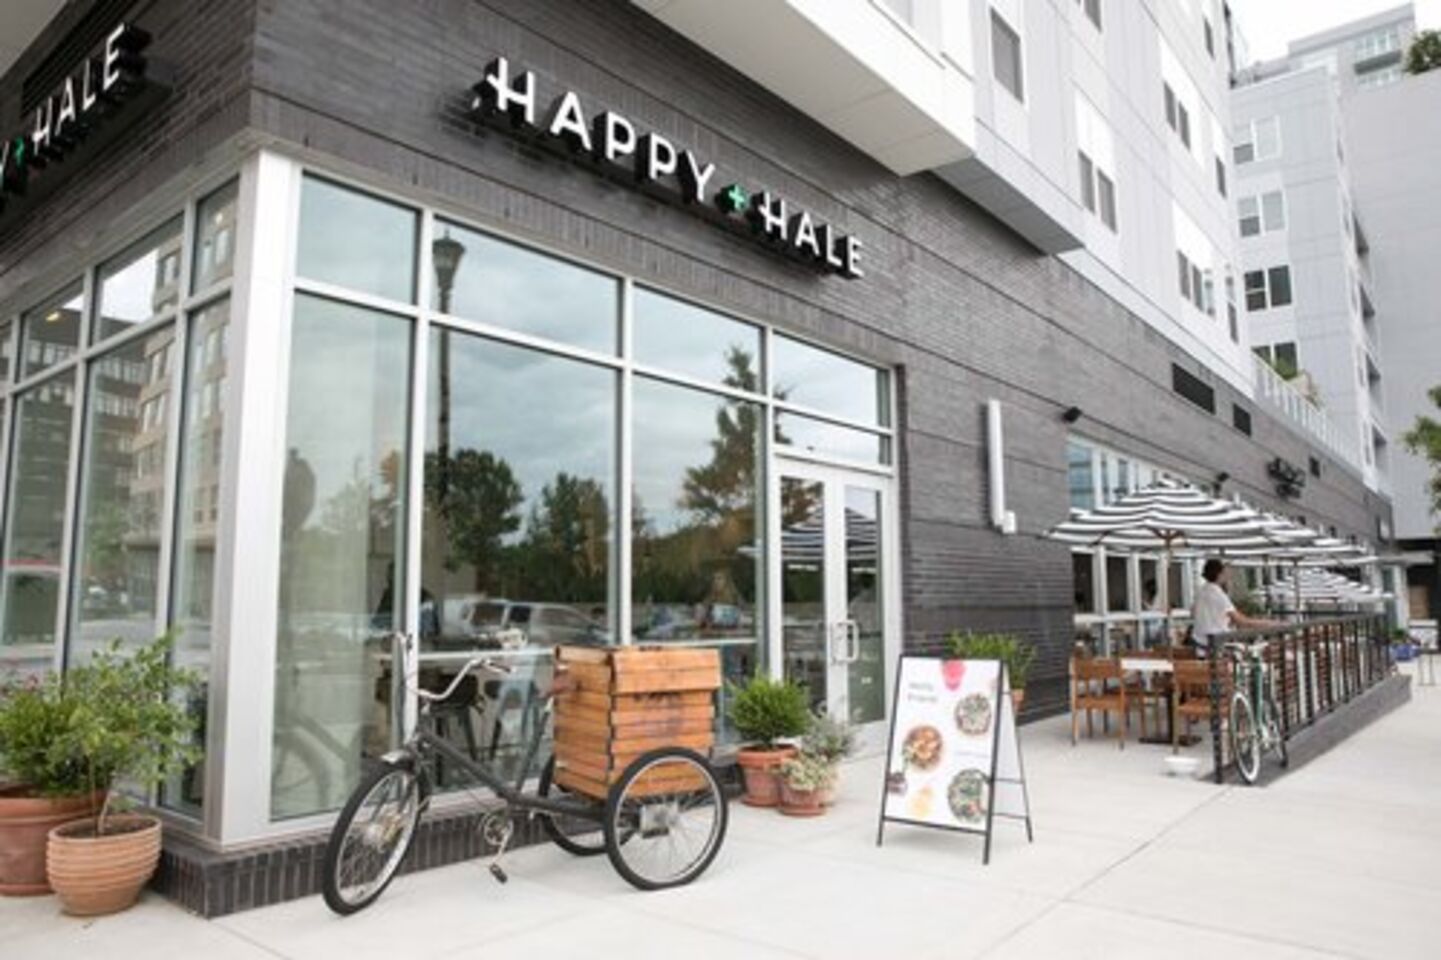 A photo of Happy + Hale, North Hills